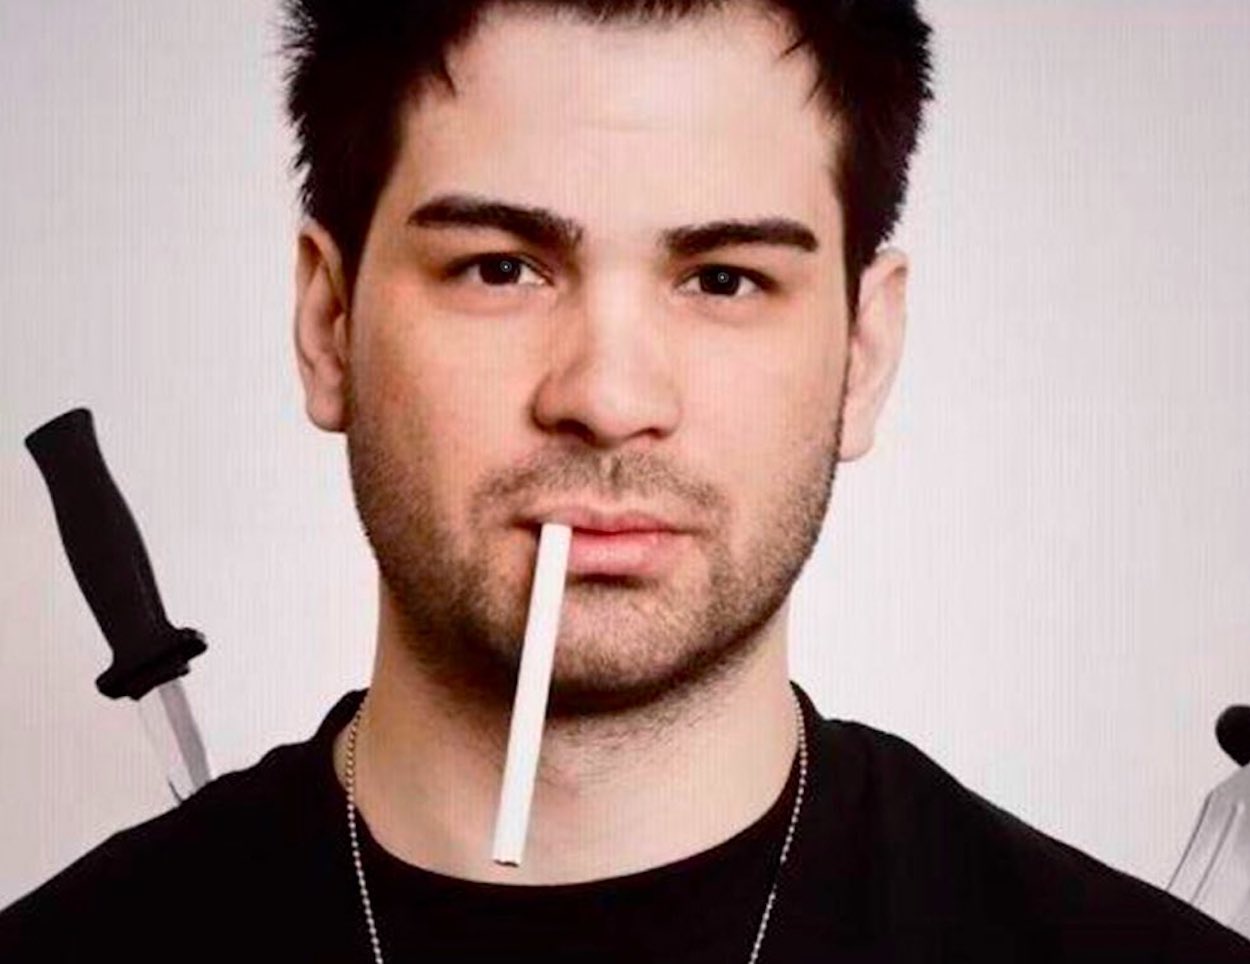 Hunter Moore, founder of IsAnyoneUp.com, with knives on his back and a cigarette in his mouth